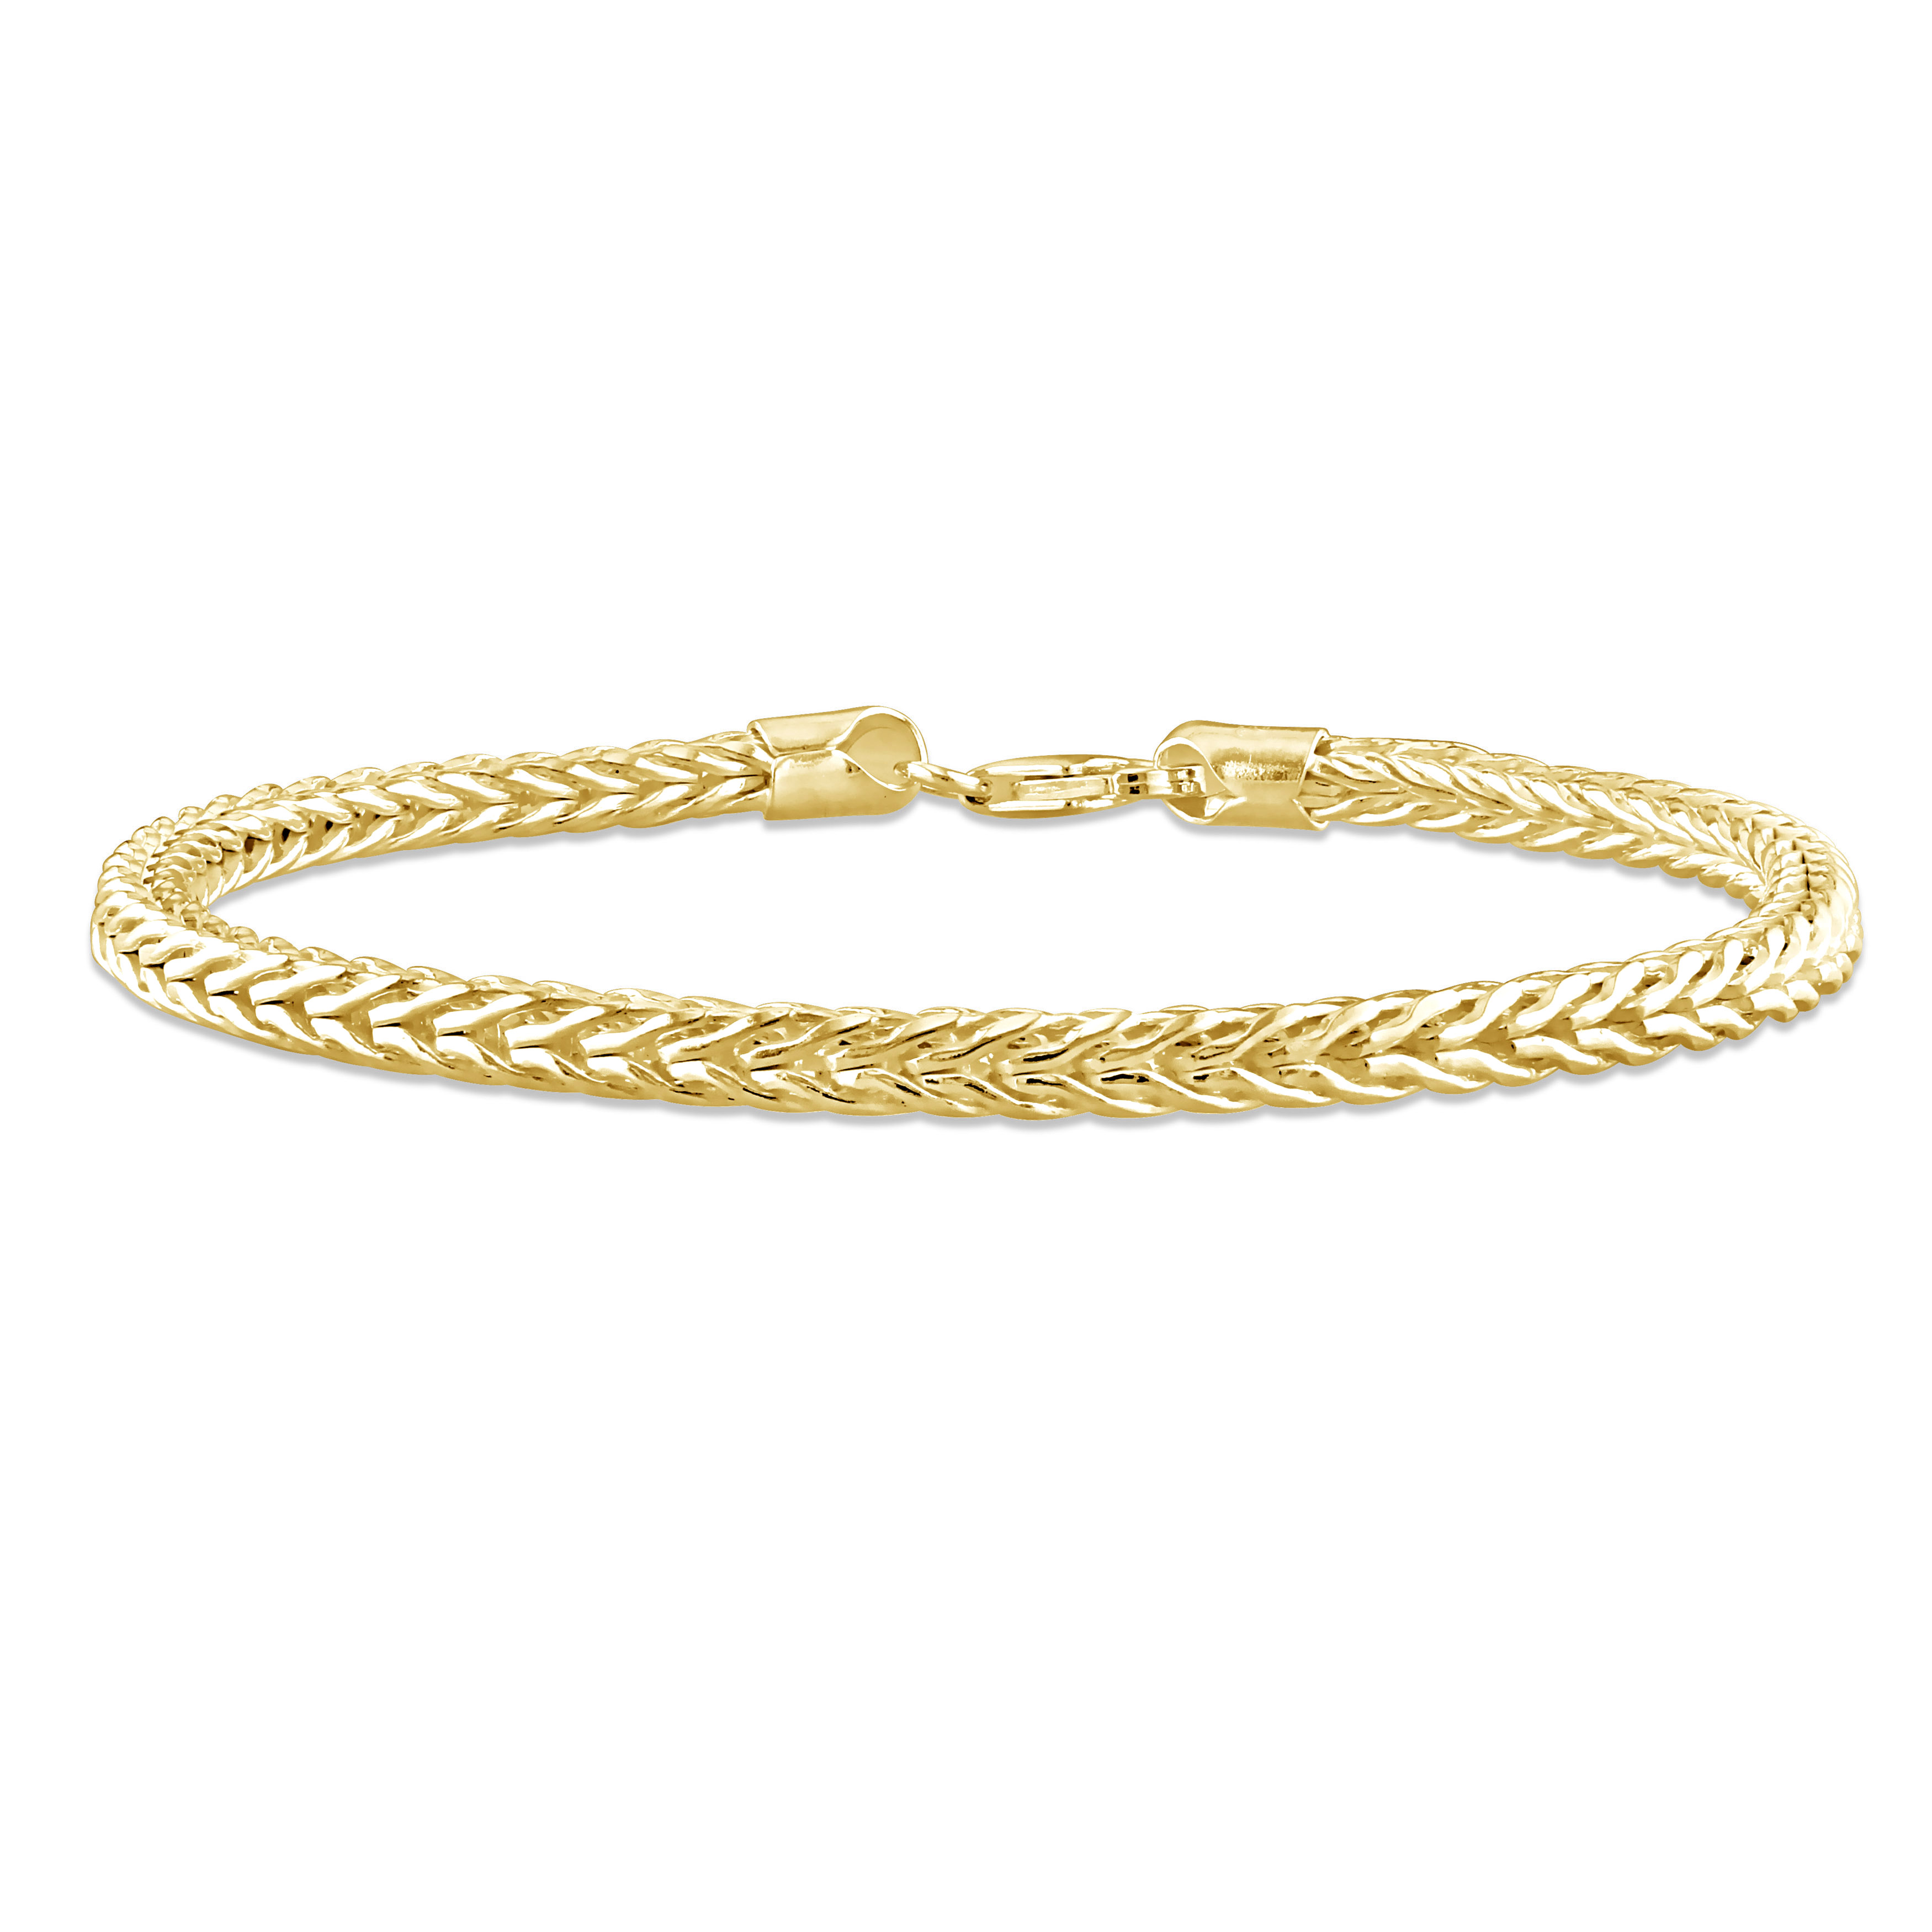 4.2mm Foxtail Chain Bracelet in 18k Yellow Gold Plated Sterling Silver - 9 in.